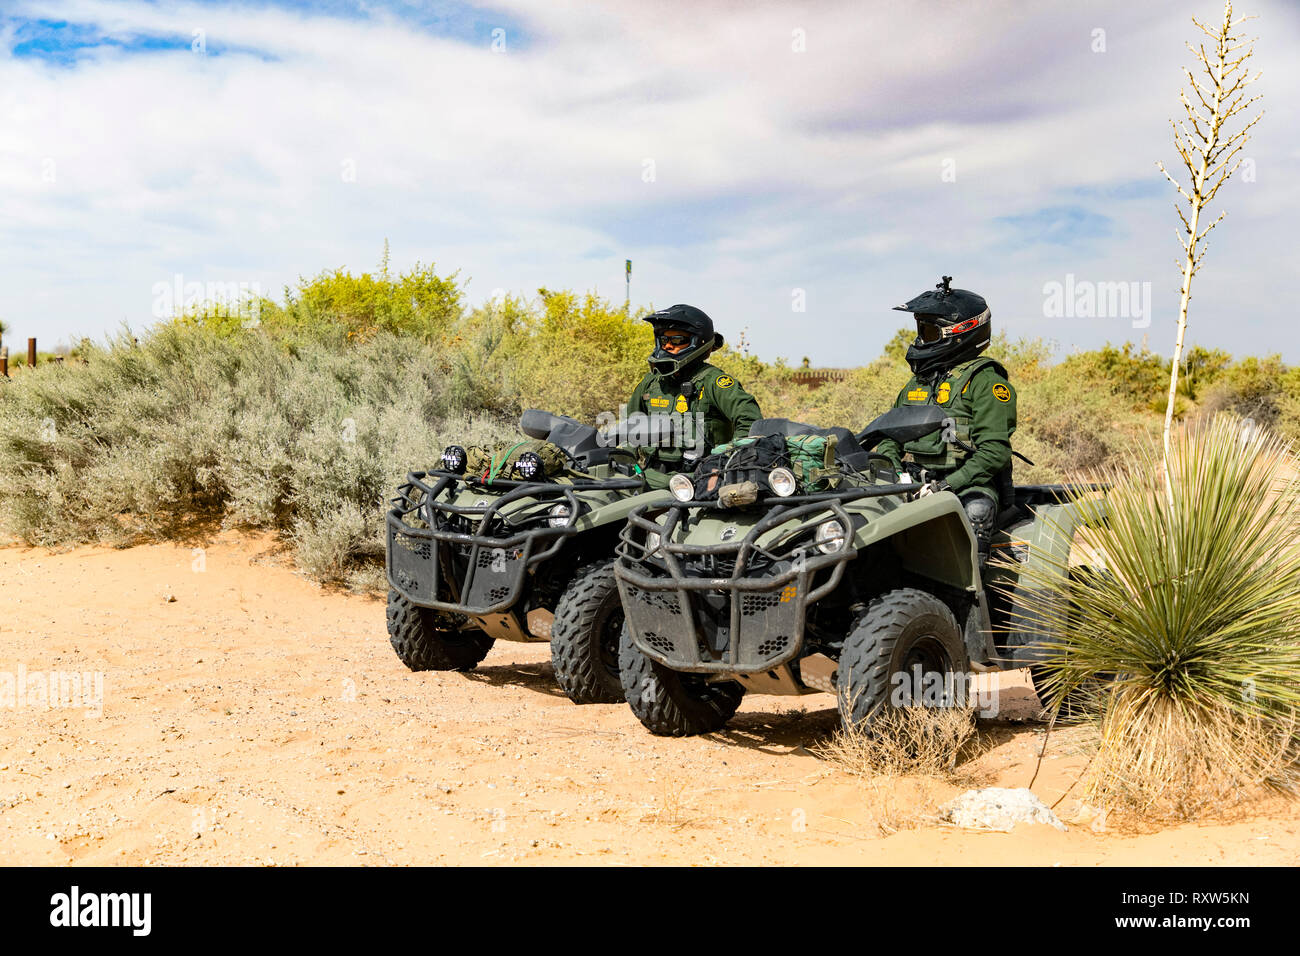 United States Customs and Border Protection (USCBP) officers guard the US-Mexico international border near the Santa Teresa Port of Entry in New Mexico on quad bikes. See more information below. Stock Photo